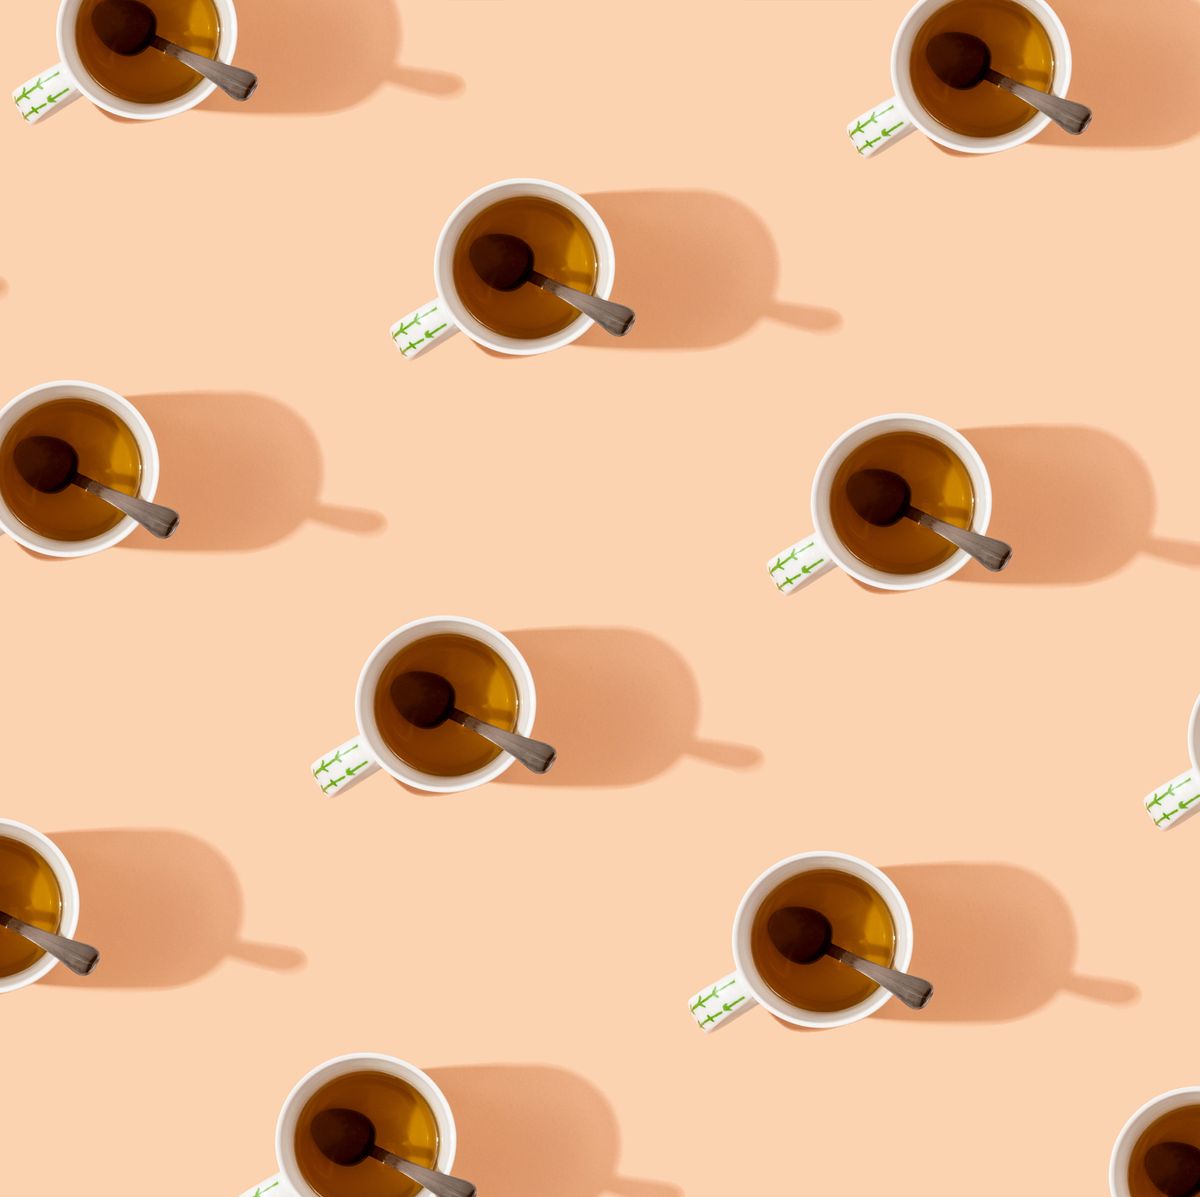 pattern of mugs of tea with spoons in them on peach colored background